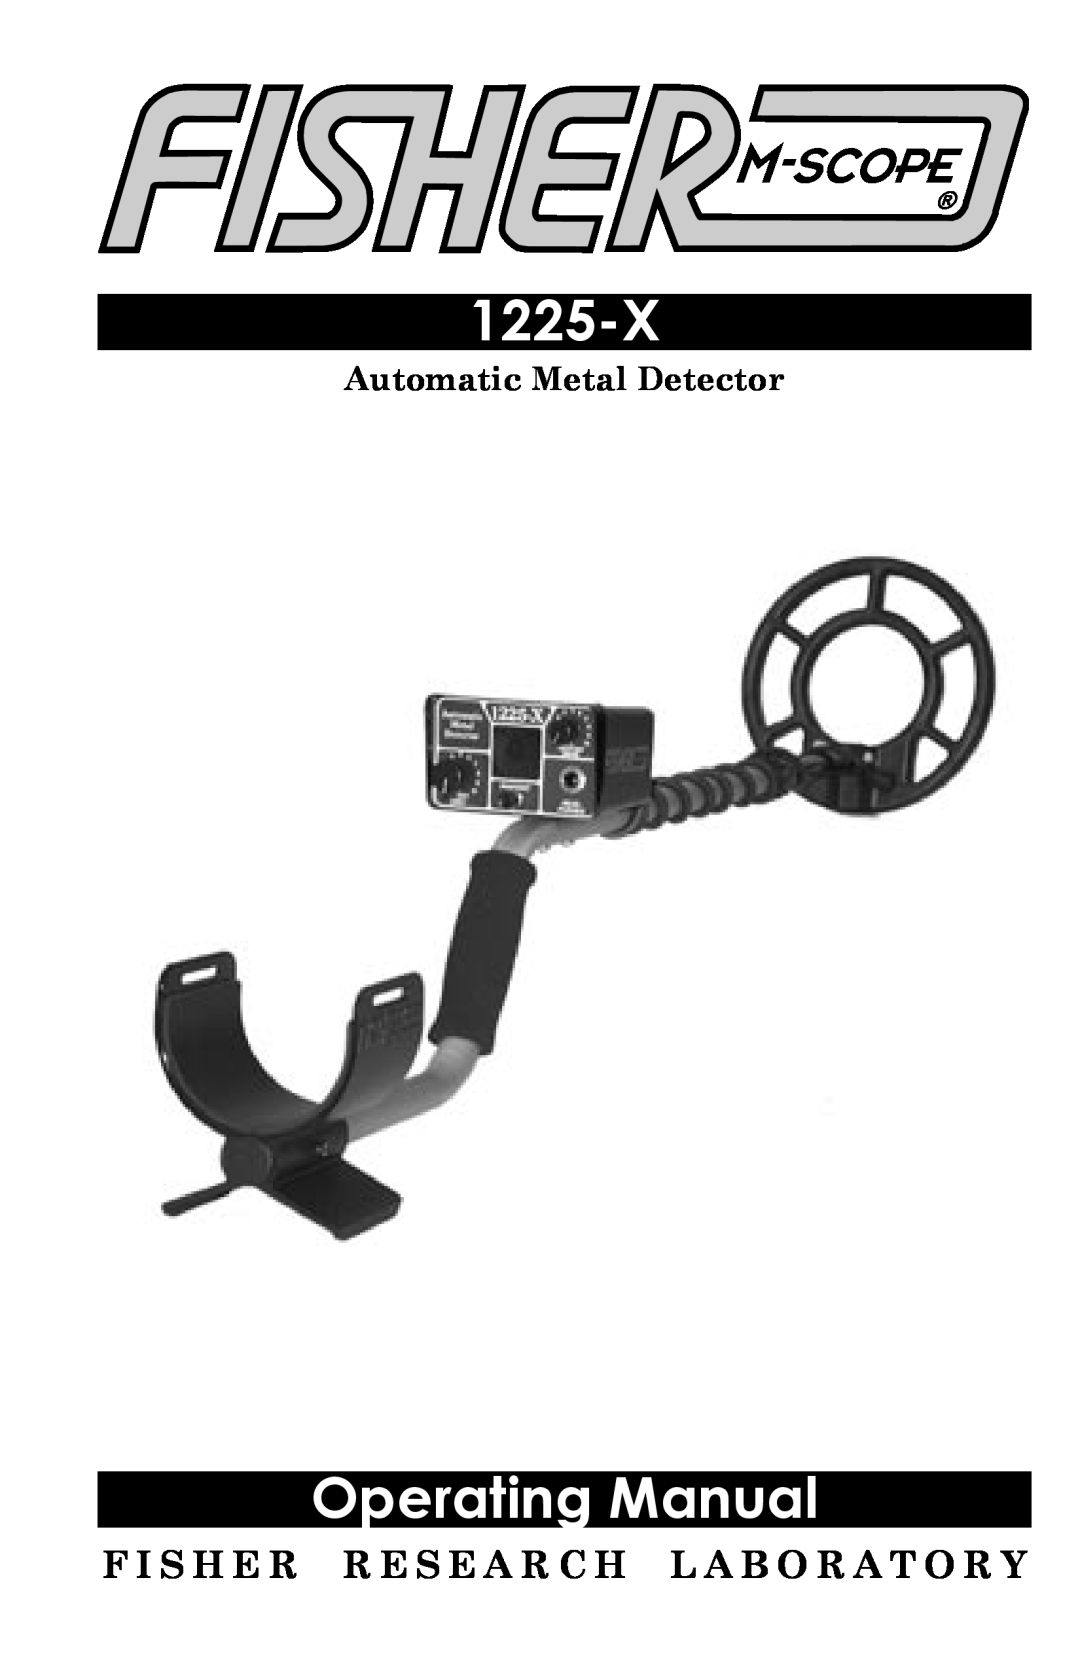 Fisher 1225-X manual Operating Manual, F I S H E R R E S E A R C H L A B O R A T O R Y, Automatic Metal Detector 